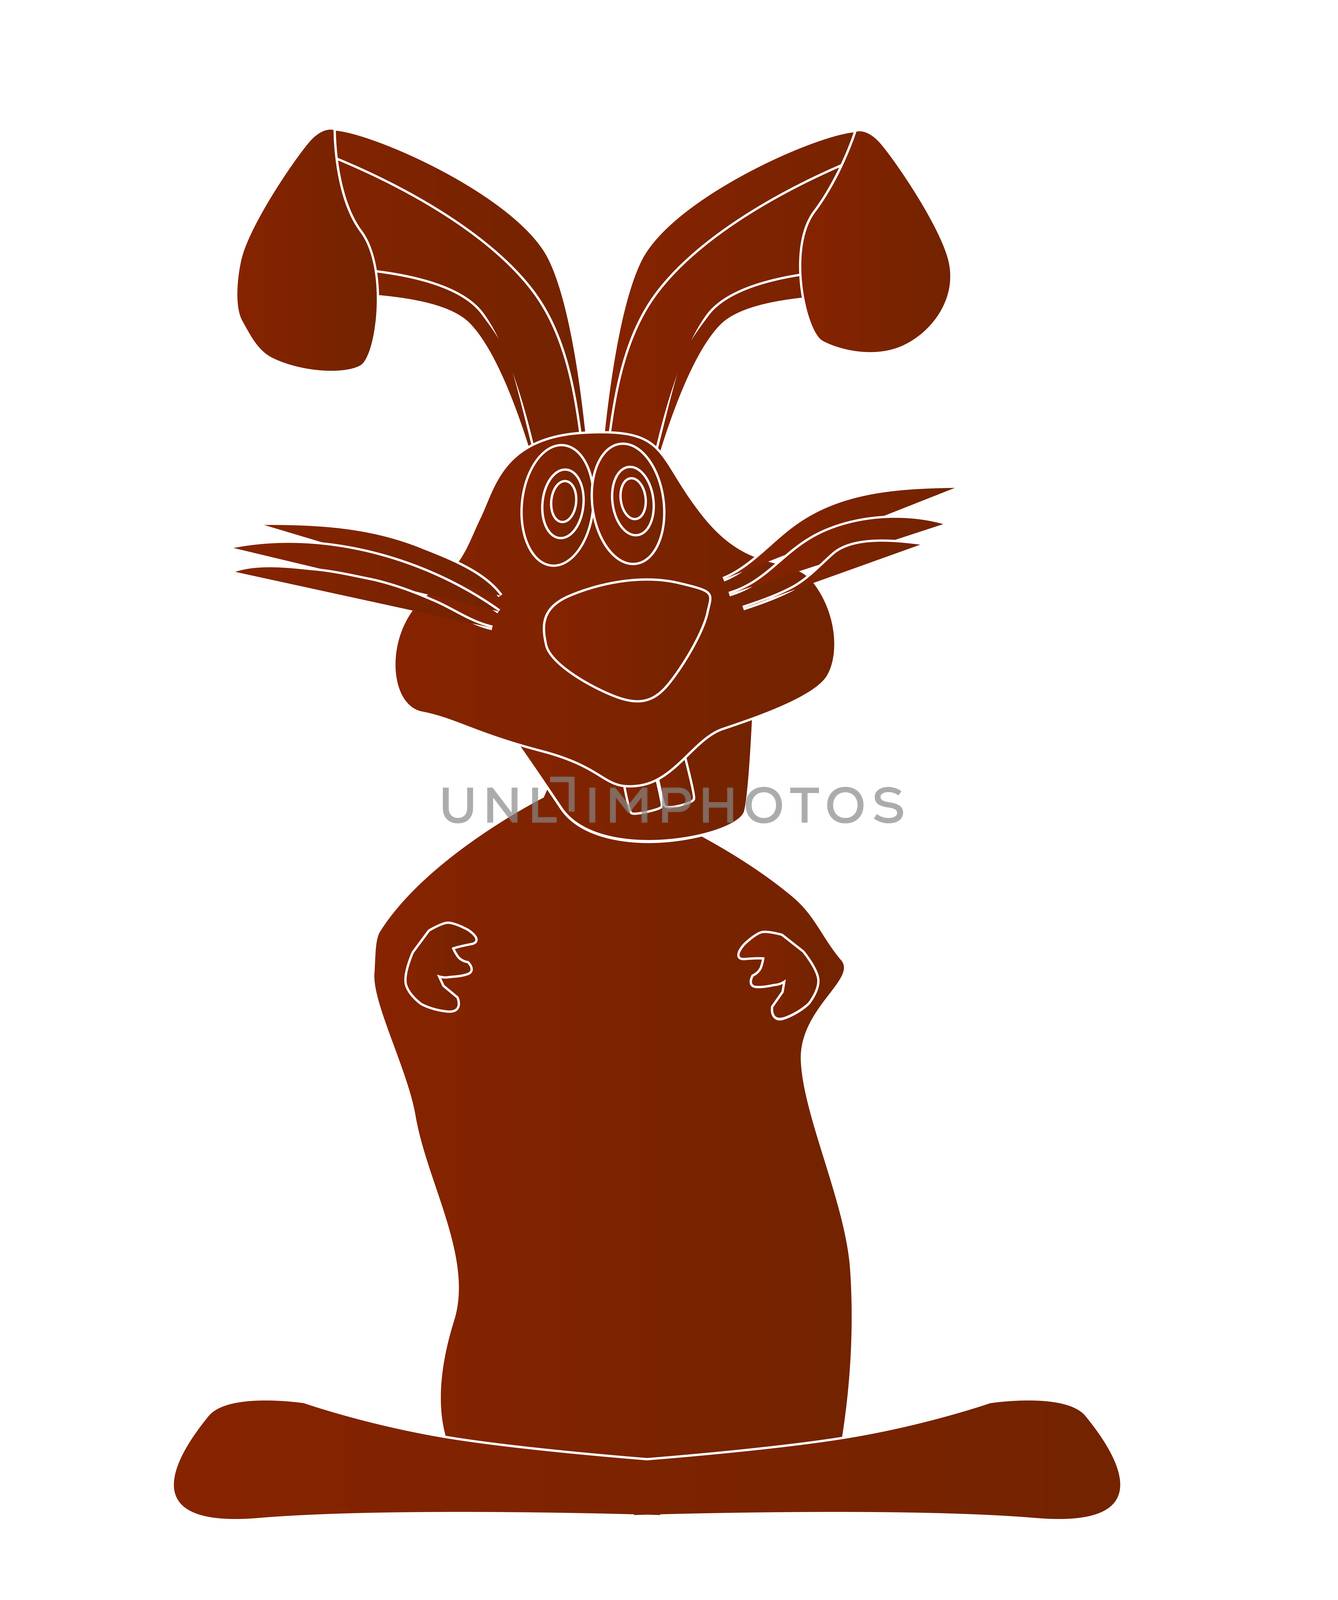 The chocolate Bunny over a white background